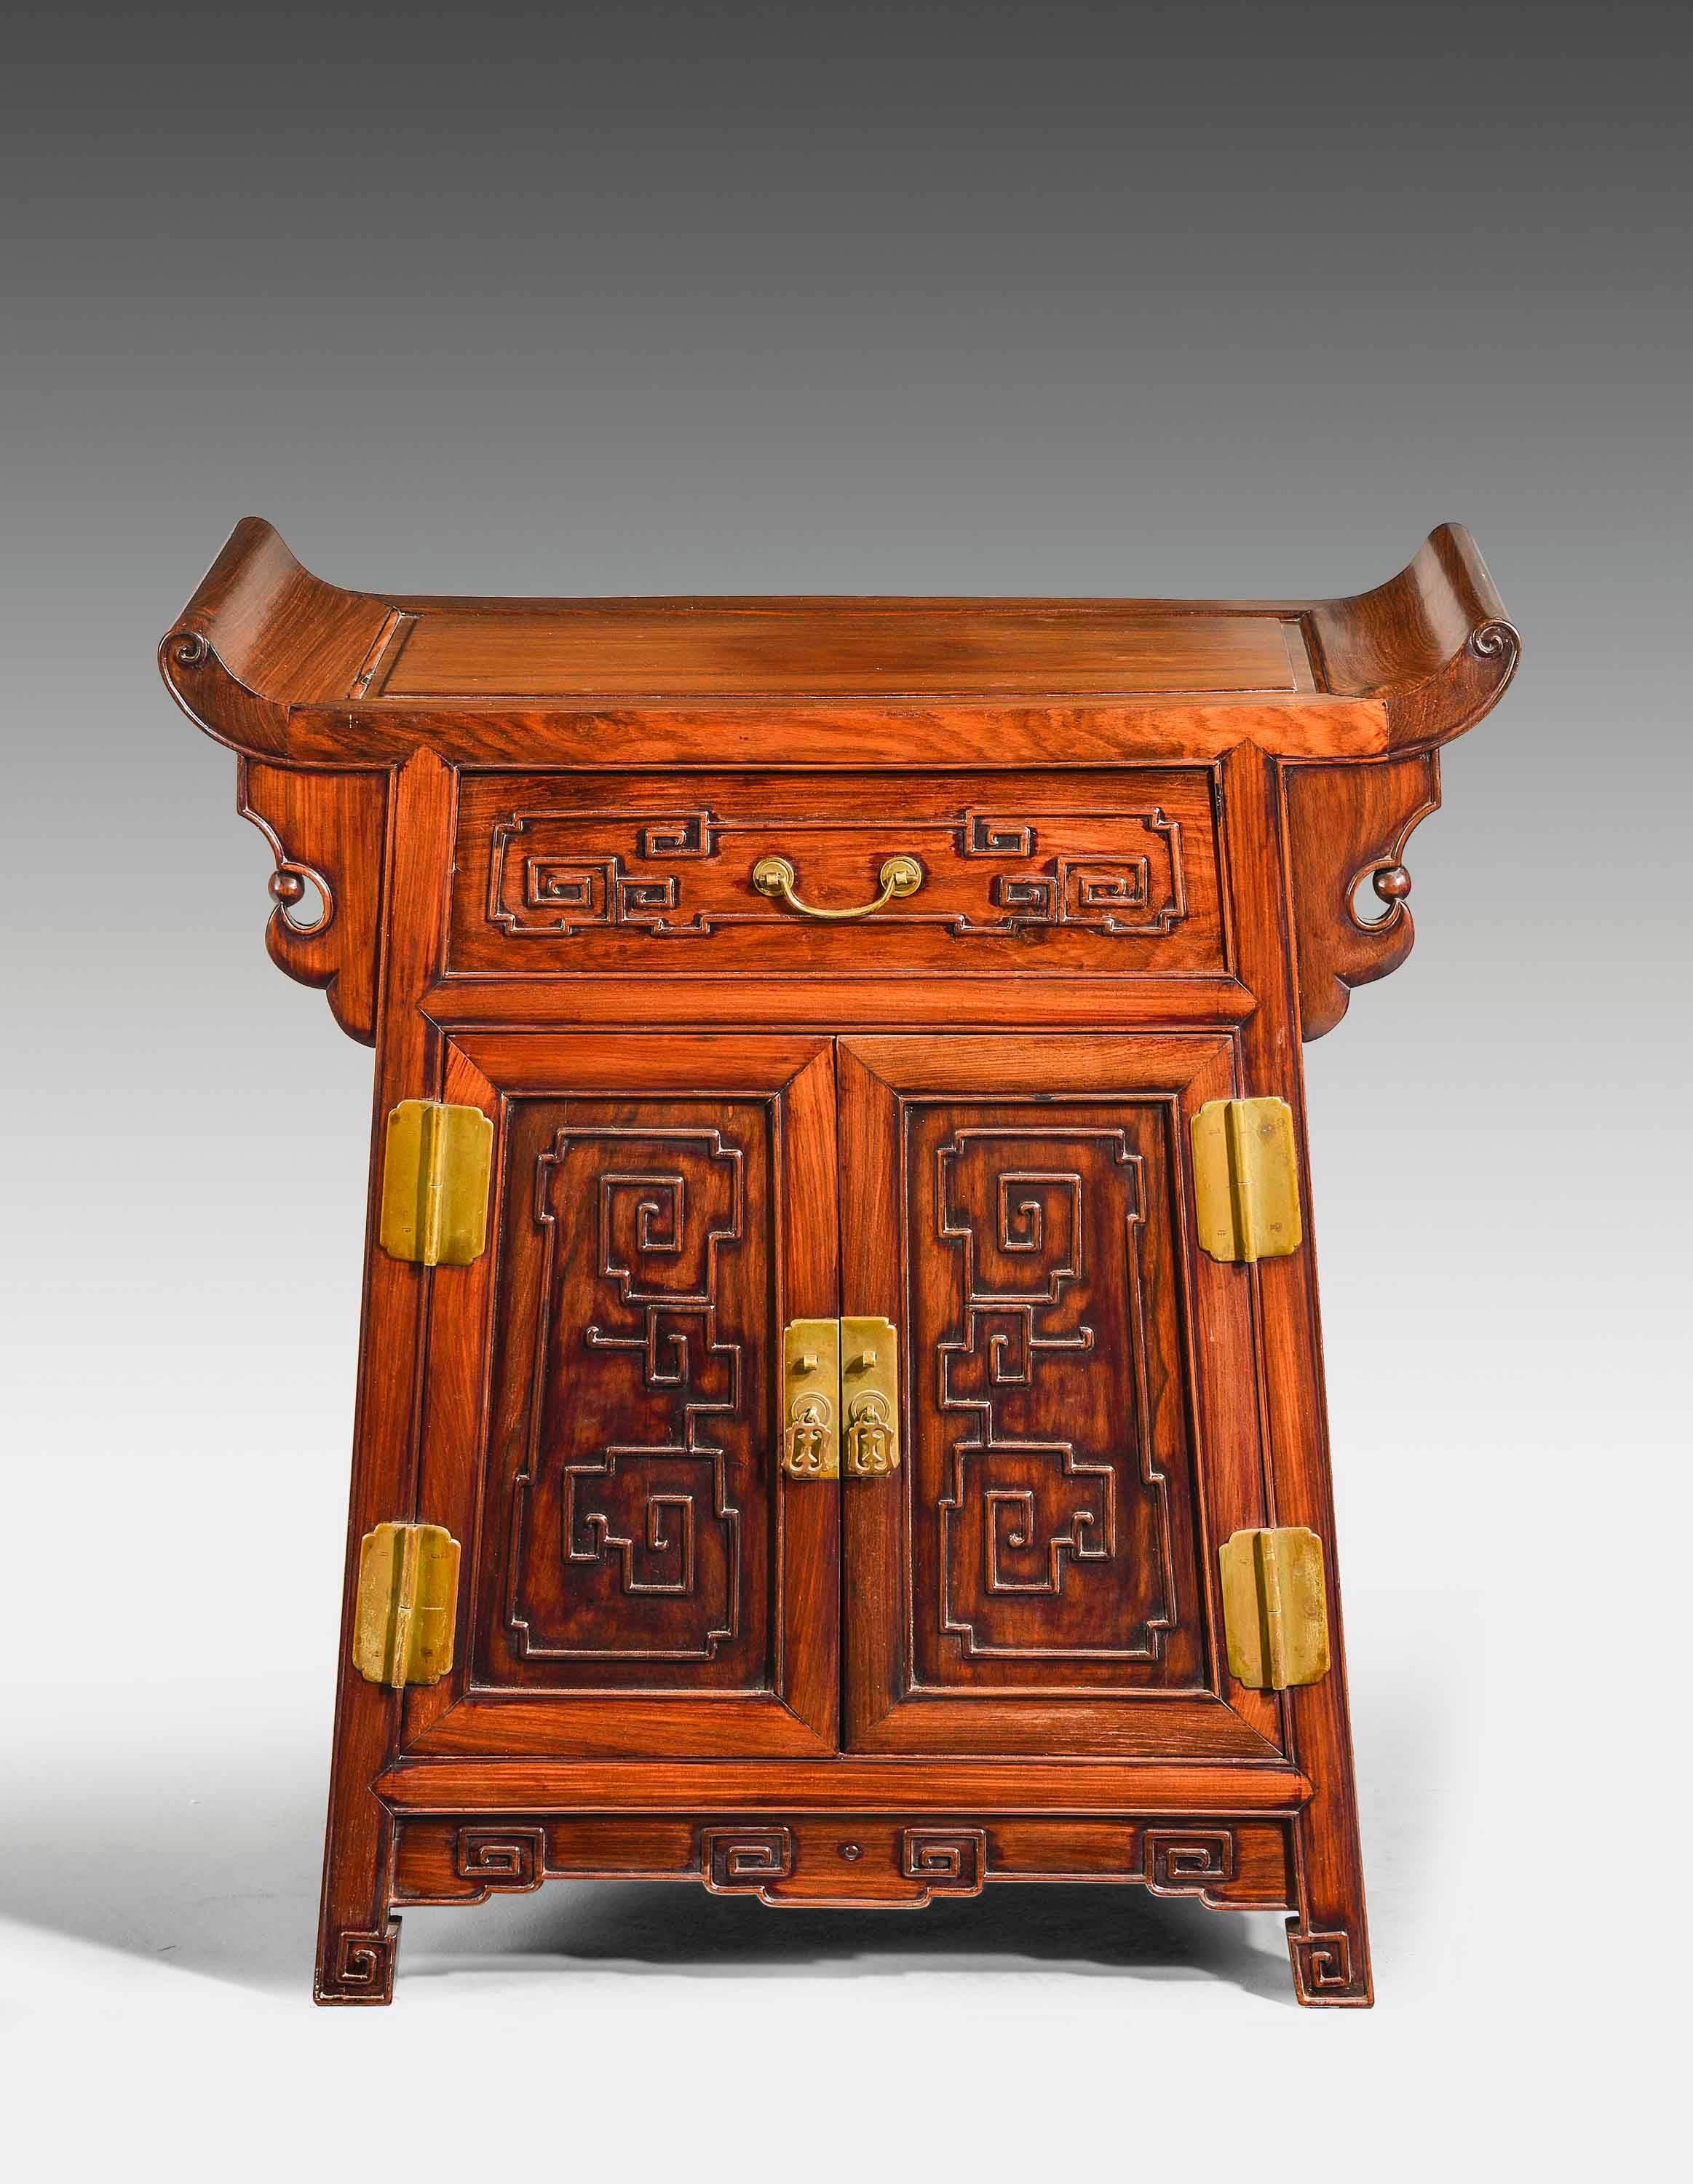 A wonderful quality Chinese hardwood side cabinet. With a flared dish top, the carving of the timbers of the very best quality and retaining the original brassware. 

RR.